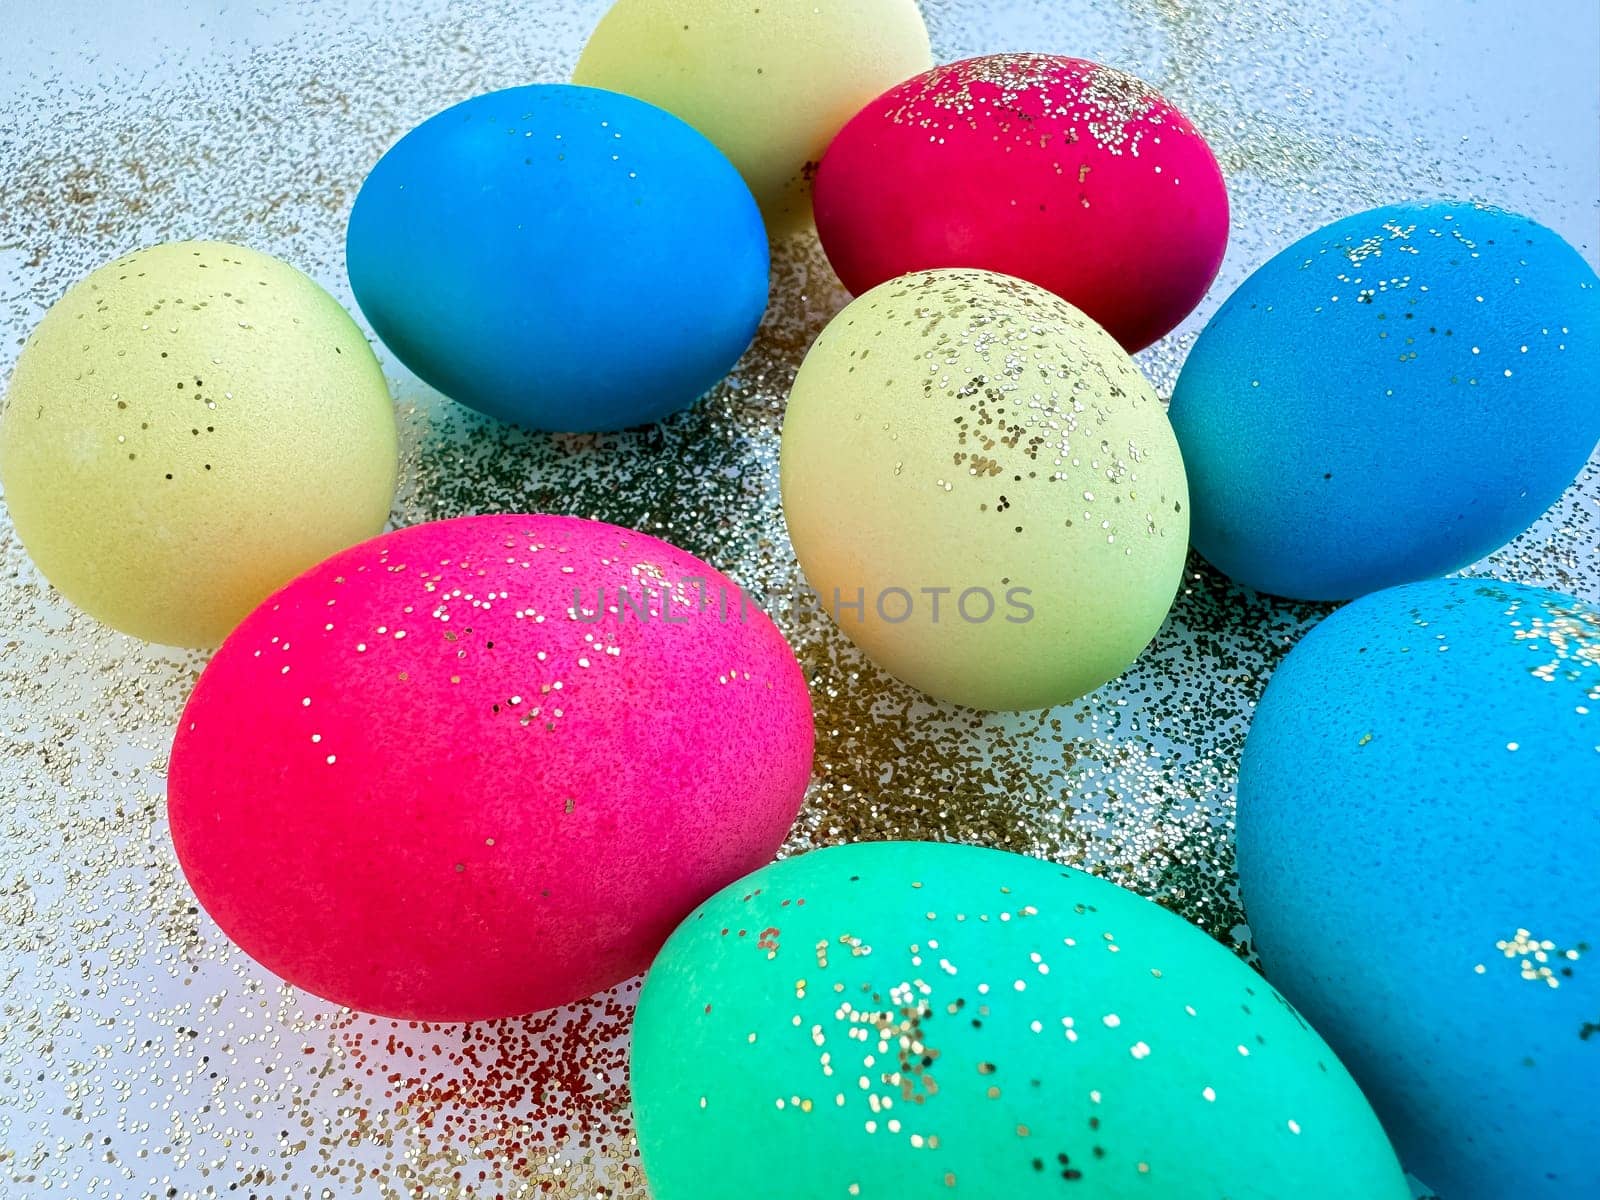 Colorful Easter eggs with glitter on a sparkling background, festive holiday decoration and celebration concept with copy space. Can be used for seasonal greeting cards, holiday party invitations, festive decoration ideas, DIY crafting tutorials, Easter themed marketing campaigns, and spring event announcements. High quality photo